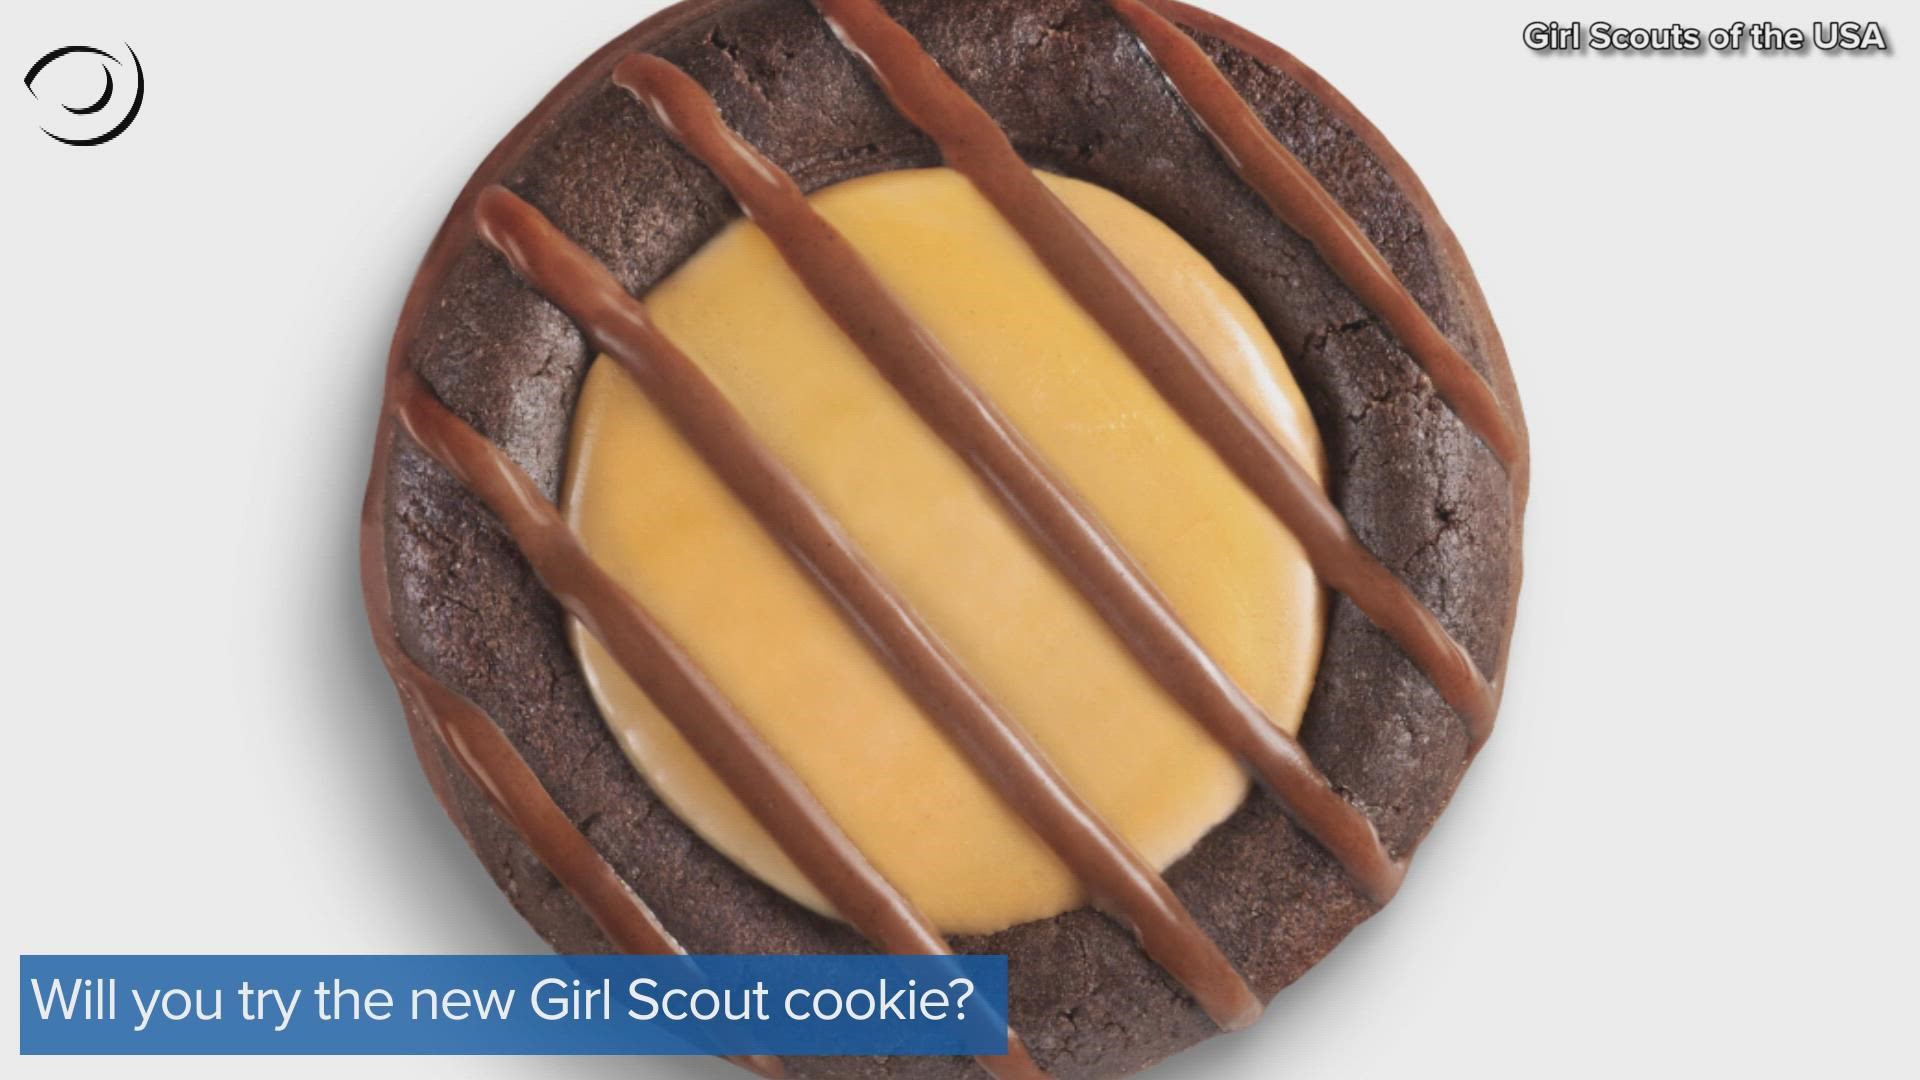 Adventurefuls - a brownie-inspired cookie with a caramel-flavored cream, a drizzle of chocolate sauce and a touch of sea salt - will be released next year.